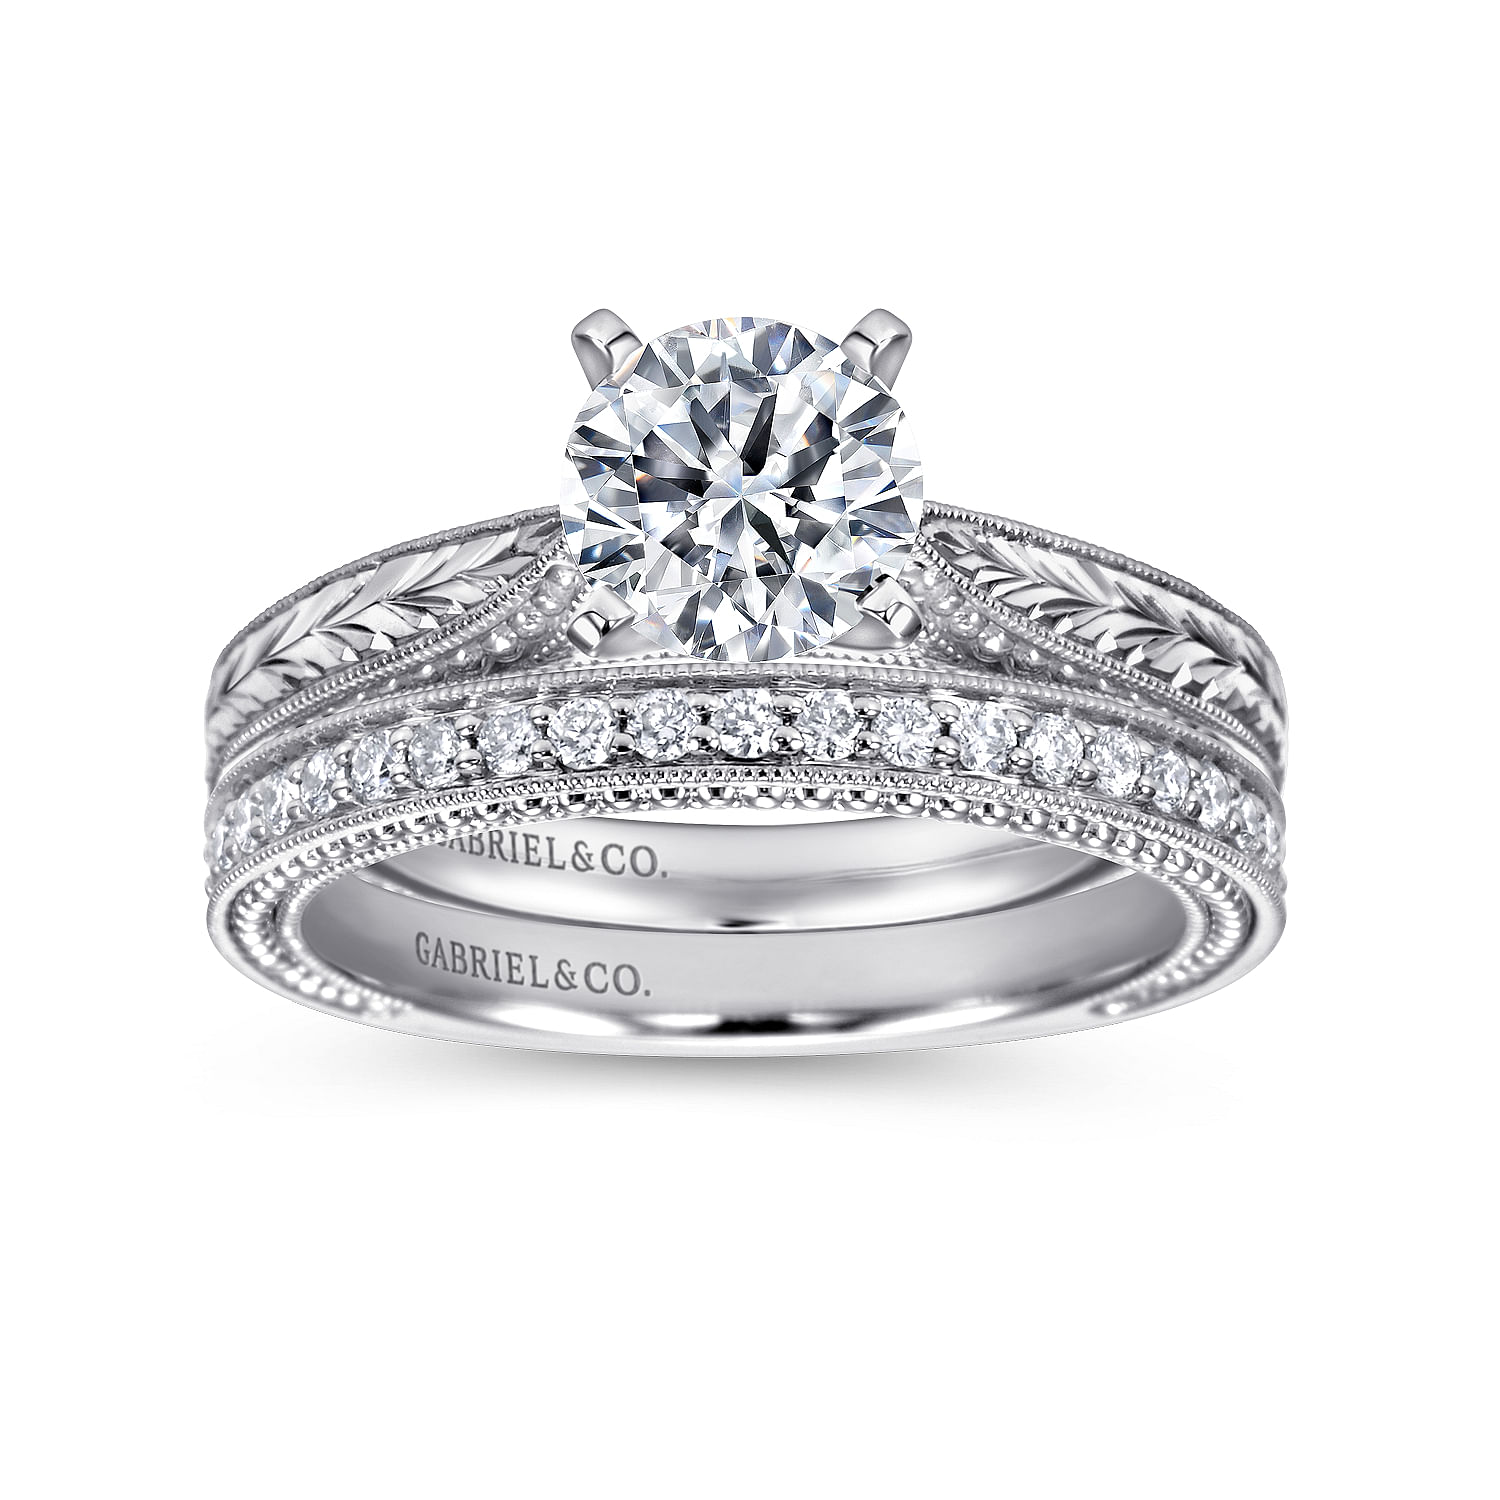 Maura - Vintage Inspired 14K White Gold Round Solitaire Engagement Ring - Shot 4